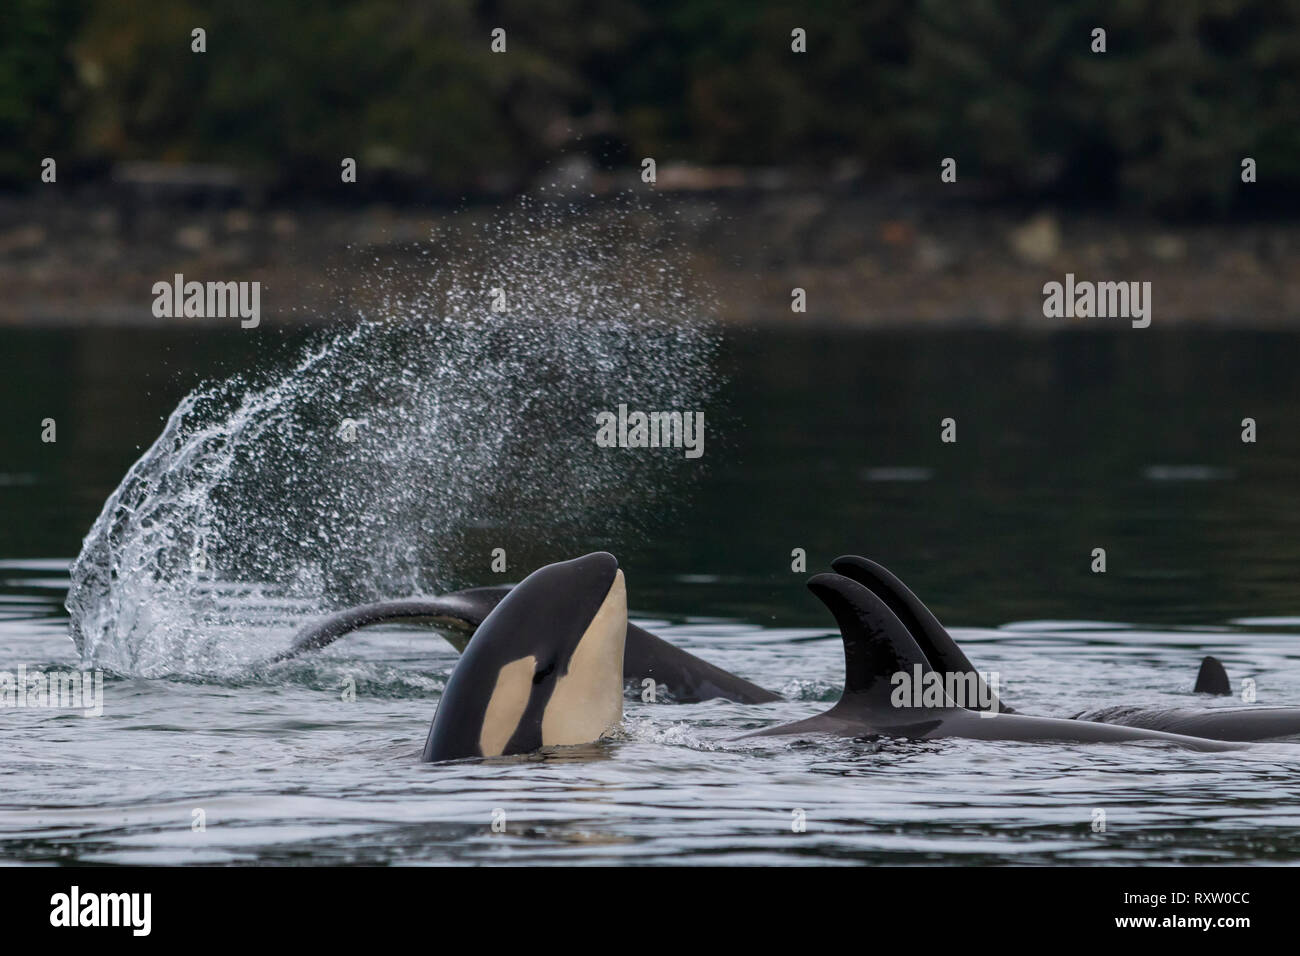 Family pod of northern resident killer whales (Orcinus orca) playing near the Broughton Archipelago, First Nations Territory, off Vancouver Island, British Columbia, Canada Stock Photo